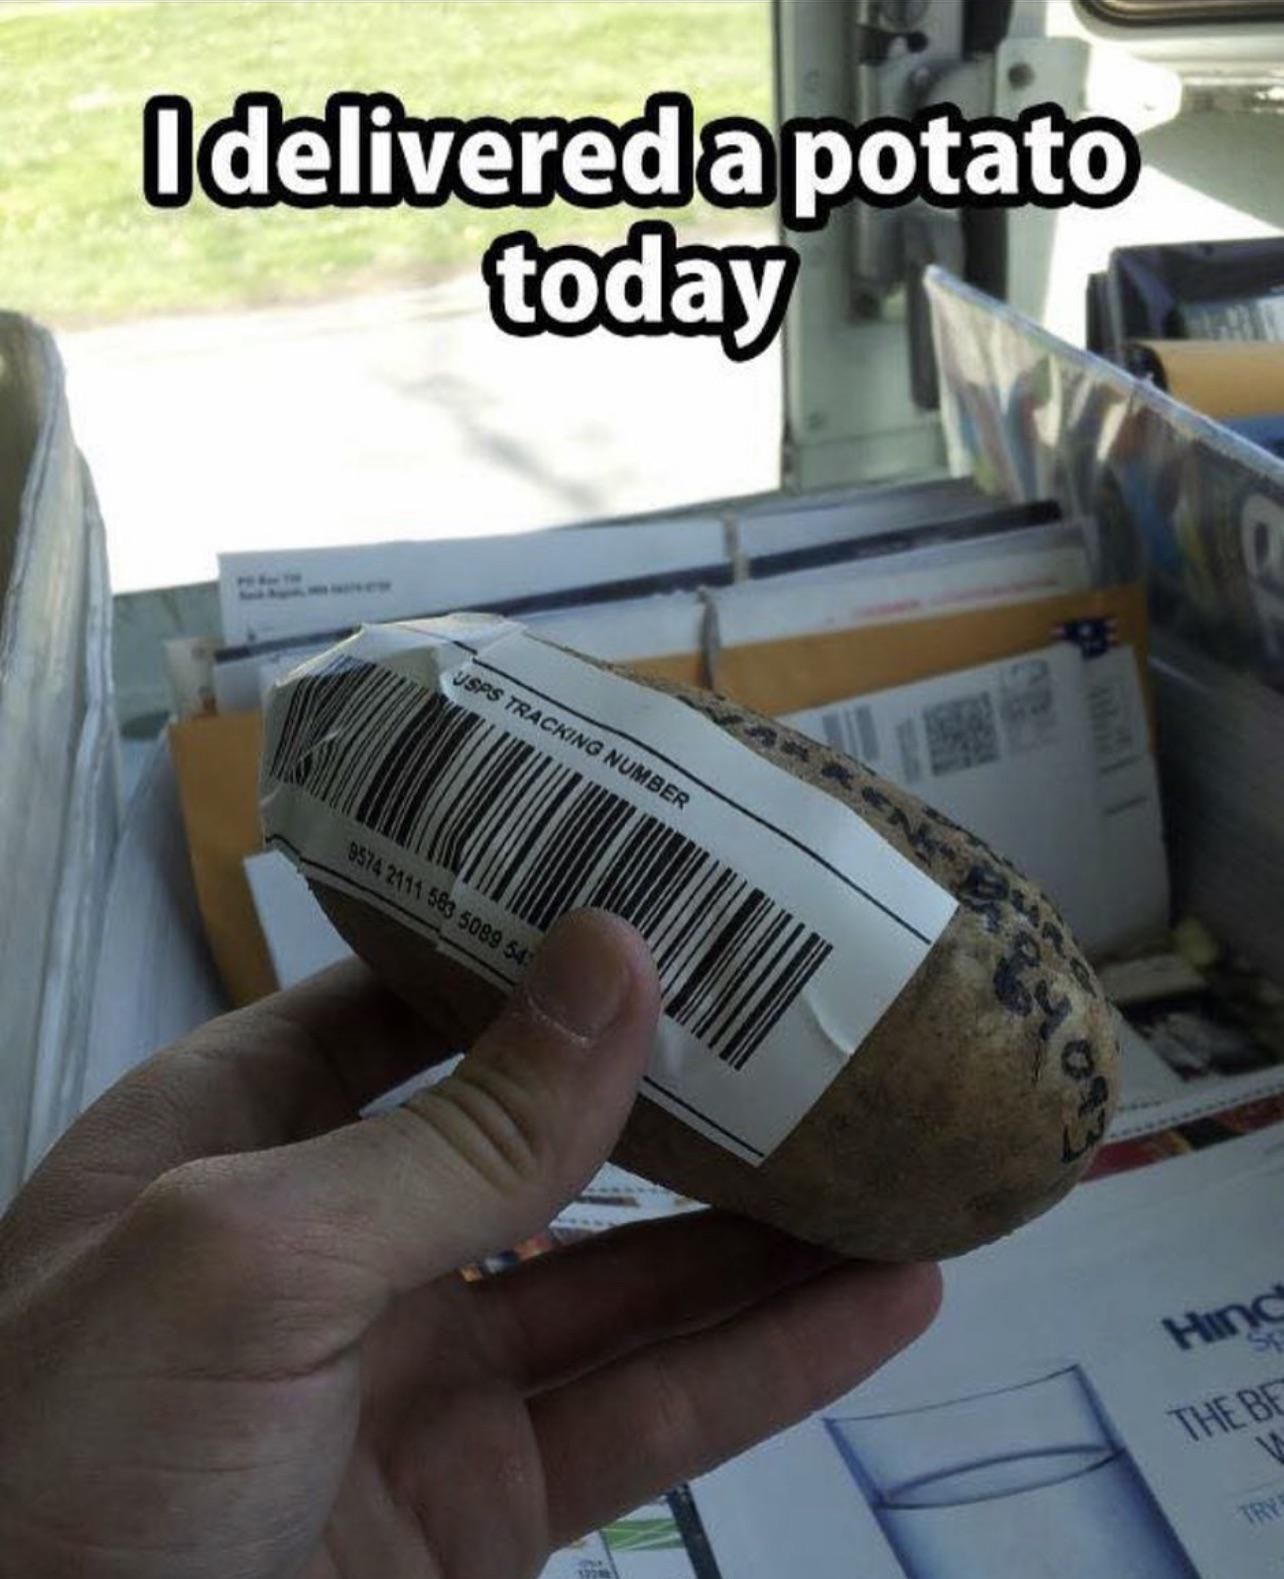 I delivered a potato today